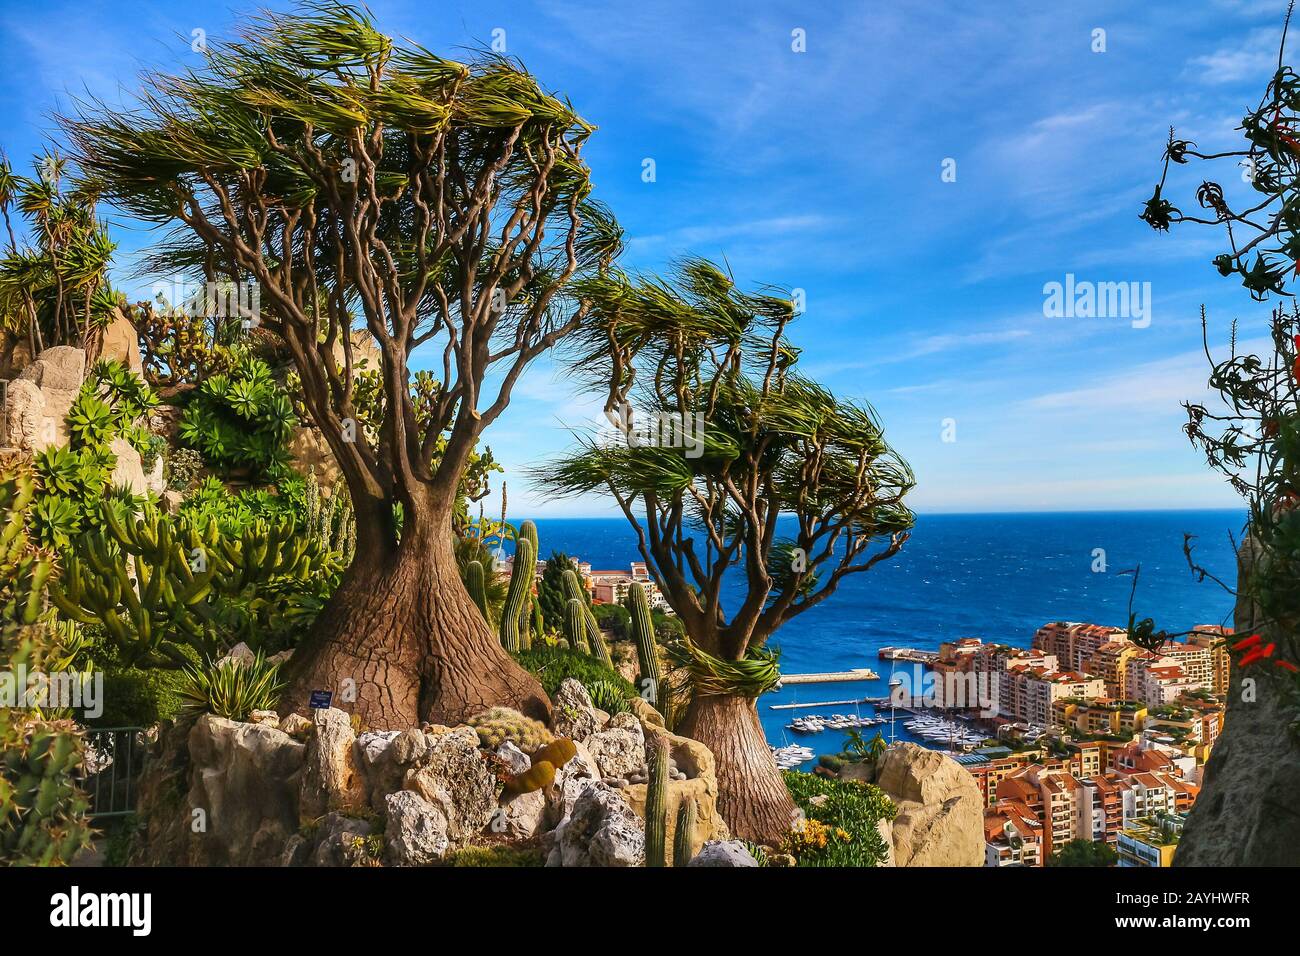 Monaco-Ville, Monaco - January 28, 2020: Beaucarnea recurvata (elephant's foot), with Fontvielle harbor and the Mediterranean in the background. Stock Photo